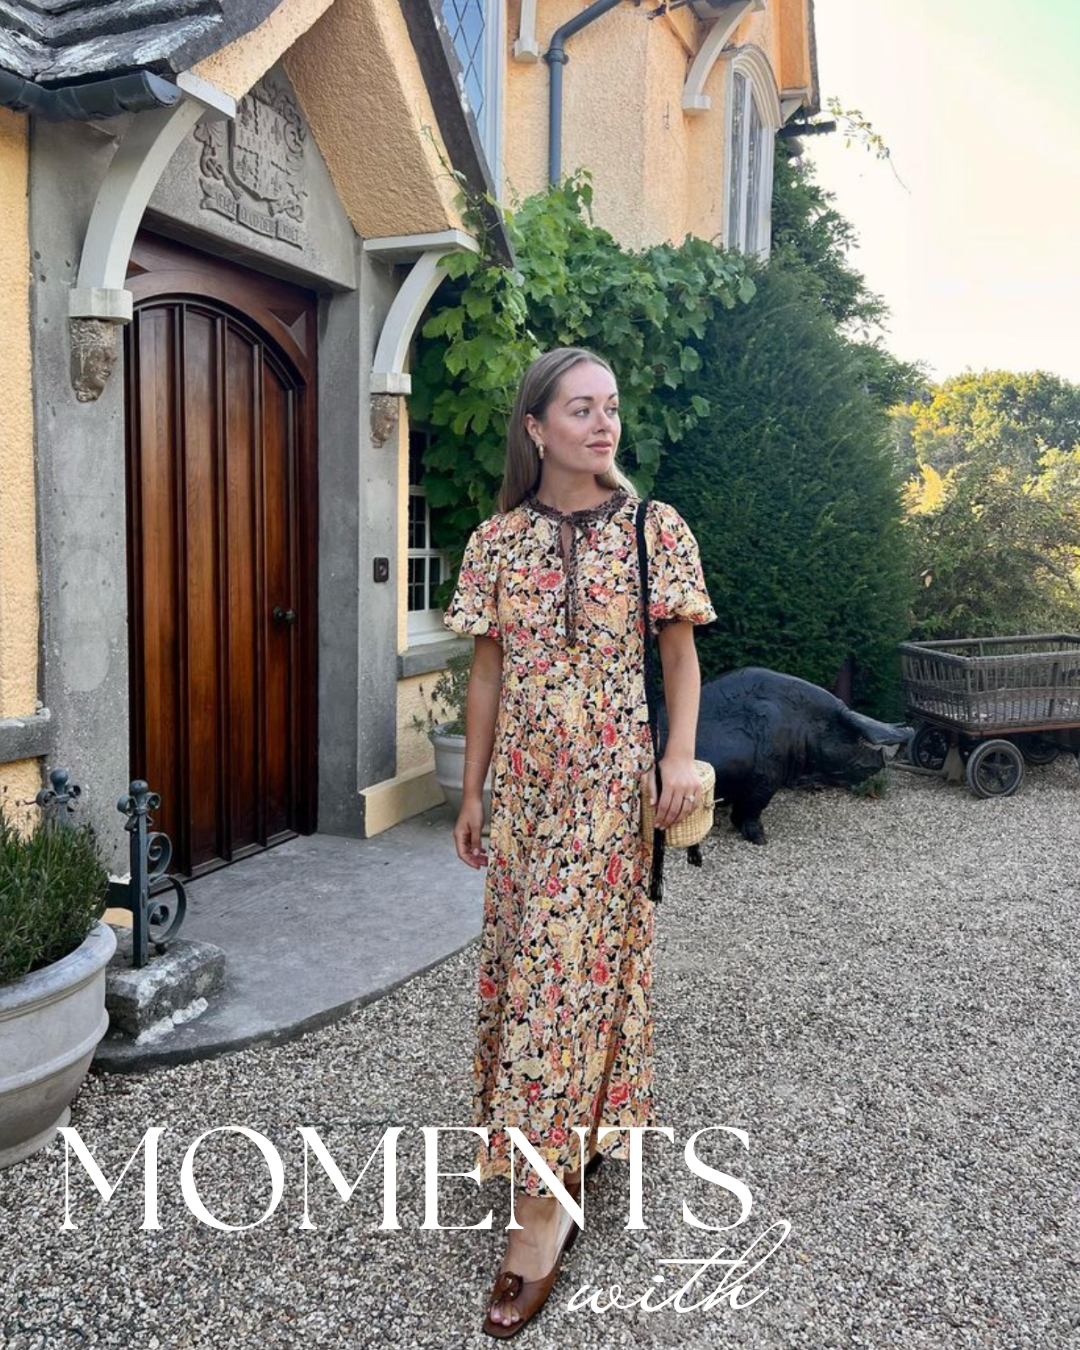 Moments with: Rachael